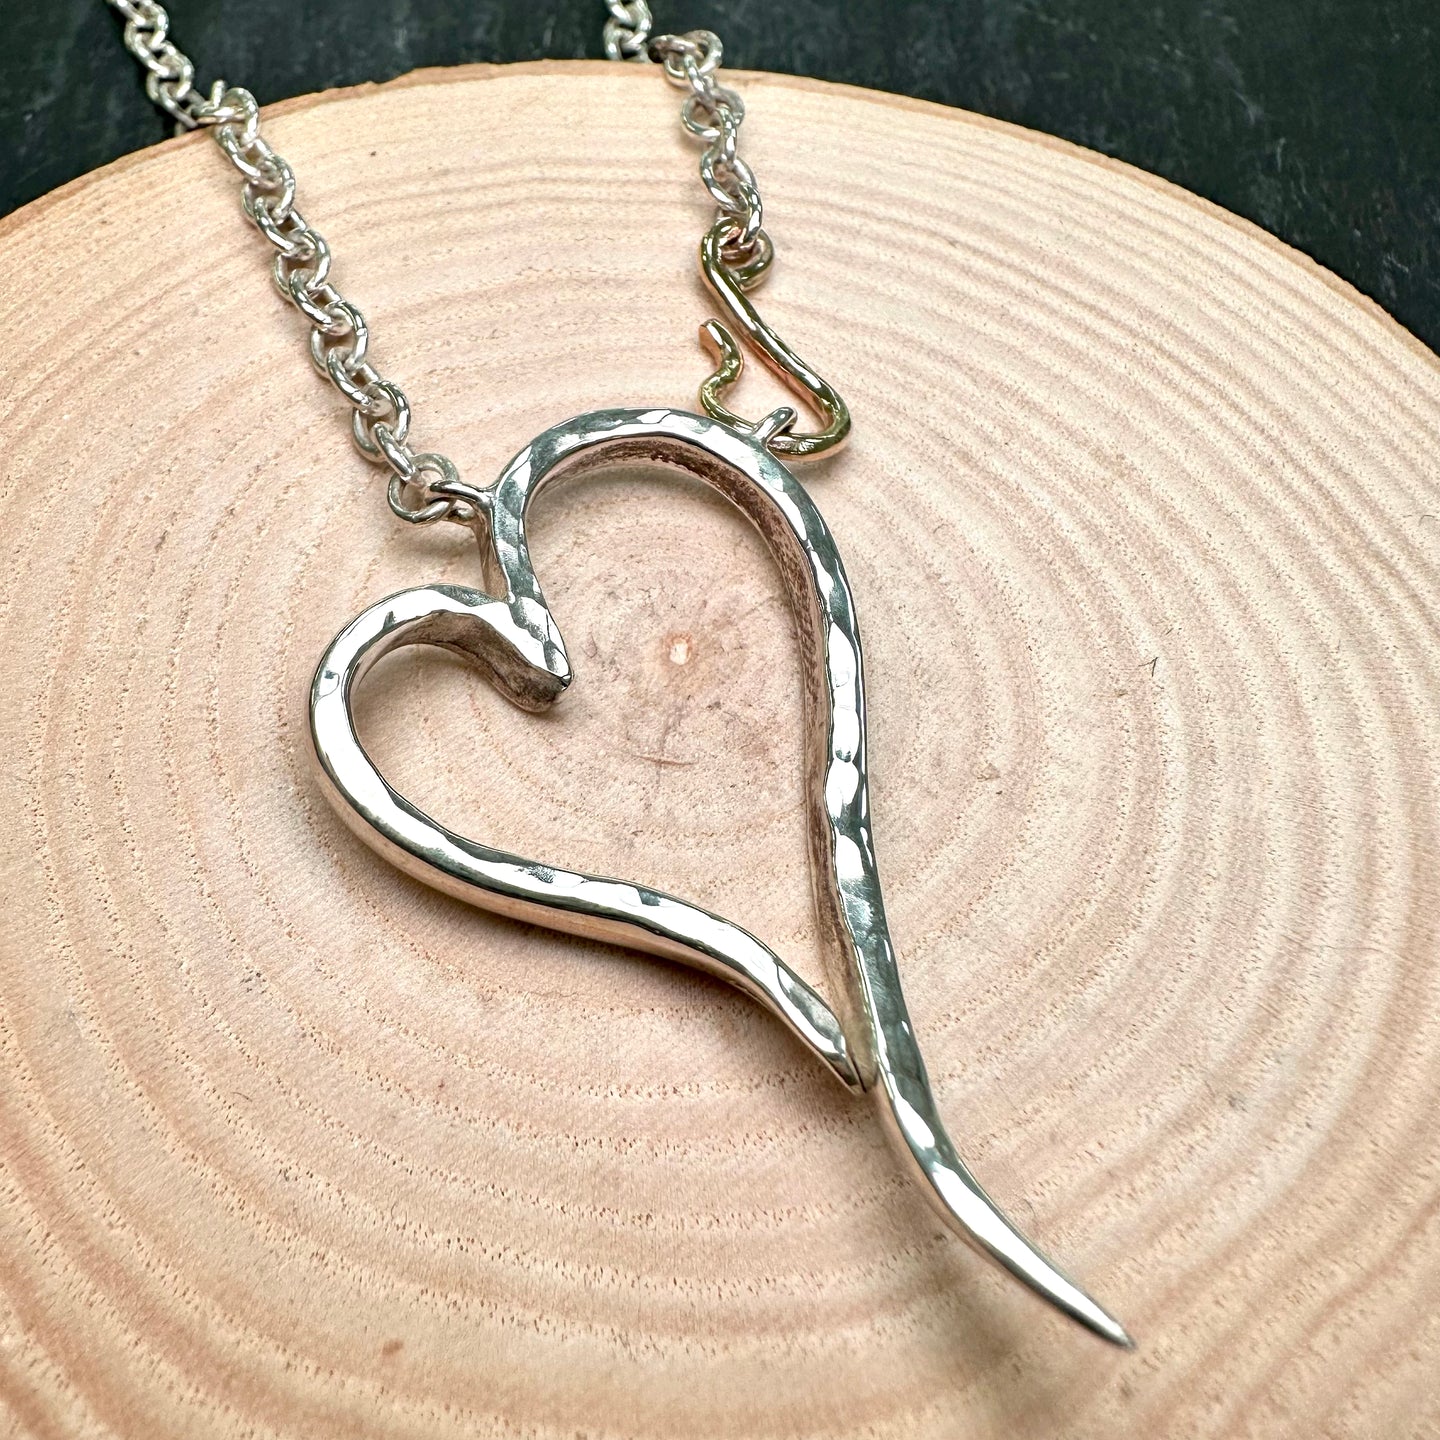 Silver & 9ct Gold Heart Necklace